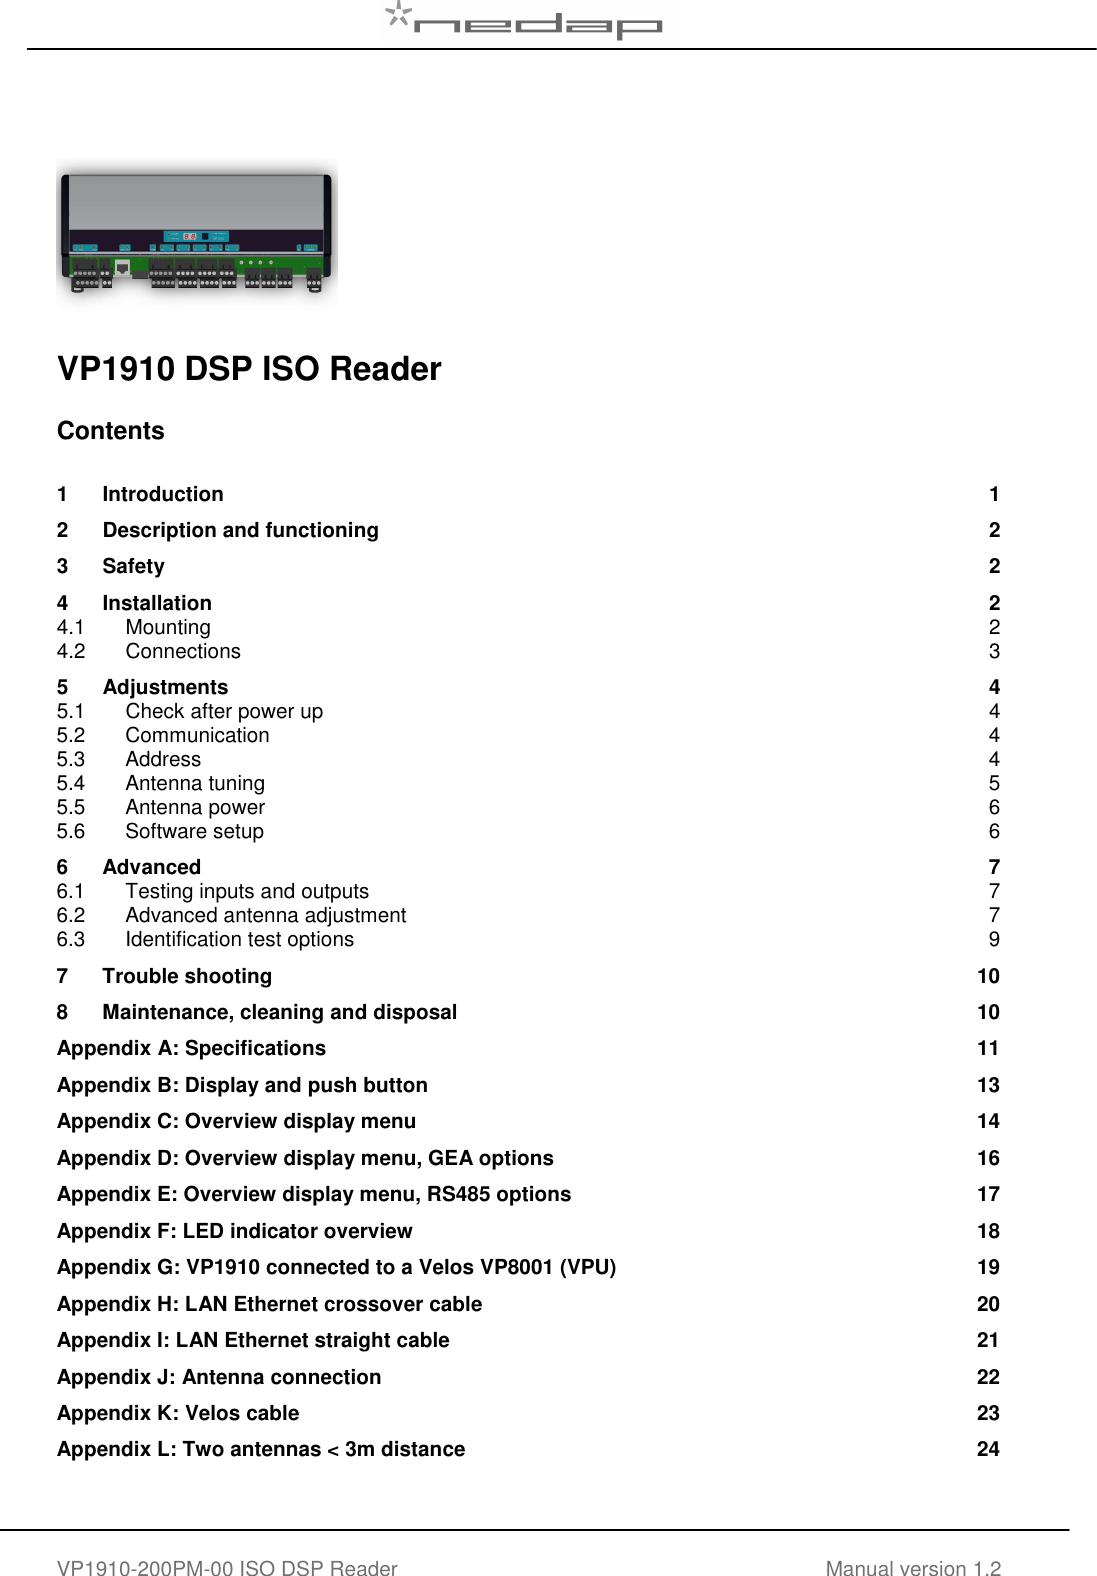   VP1910-200PM-00 ISO DSP Reader Manual version 1.2        VP1910 DSP ISO Reader   Contents  1 Introduction  1 2 Description and functioning  2 3 Safety  2 4 Installation  2 4.1 Mounting  2 4.2 Connections  3 5 Adjustments  4 5.1 Check after power up  4 5.2 Communication  4 5.3 Address  4 5.4 Antenna tuning  5 5.5 Antenna power  6 5.6 Software setup  6 6 Advanced  7 6.1 Testing inputs and outputs  7 6.2 Advanced antenna adjustment  7 6.3 Identification test options  9 7 Trouble shooting  10 8 Maintenance, cleaning and disposal  10 Appendix A: Specifications  11 Appendix B: Display and push button  13 Appendix C: Overview display menu  14 Appendix D: Overview display menu, GEA options  16 Appendix E: Overview display menu, RS485 options  17 Appendix F: LED indicator overview  18 Appendix G: VP1910 connected to a Velos VP8001 (VPU)  19 Appendix H: LAN Ethernet crossover cable  20 Appendix I: LAN Ethernet straight cable  21 Appendix J: Antenna connection  22 Appendix K: Velos cable  23 Appendix L: Two antennas &lt; 3m distance  24     